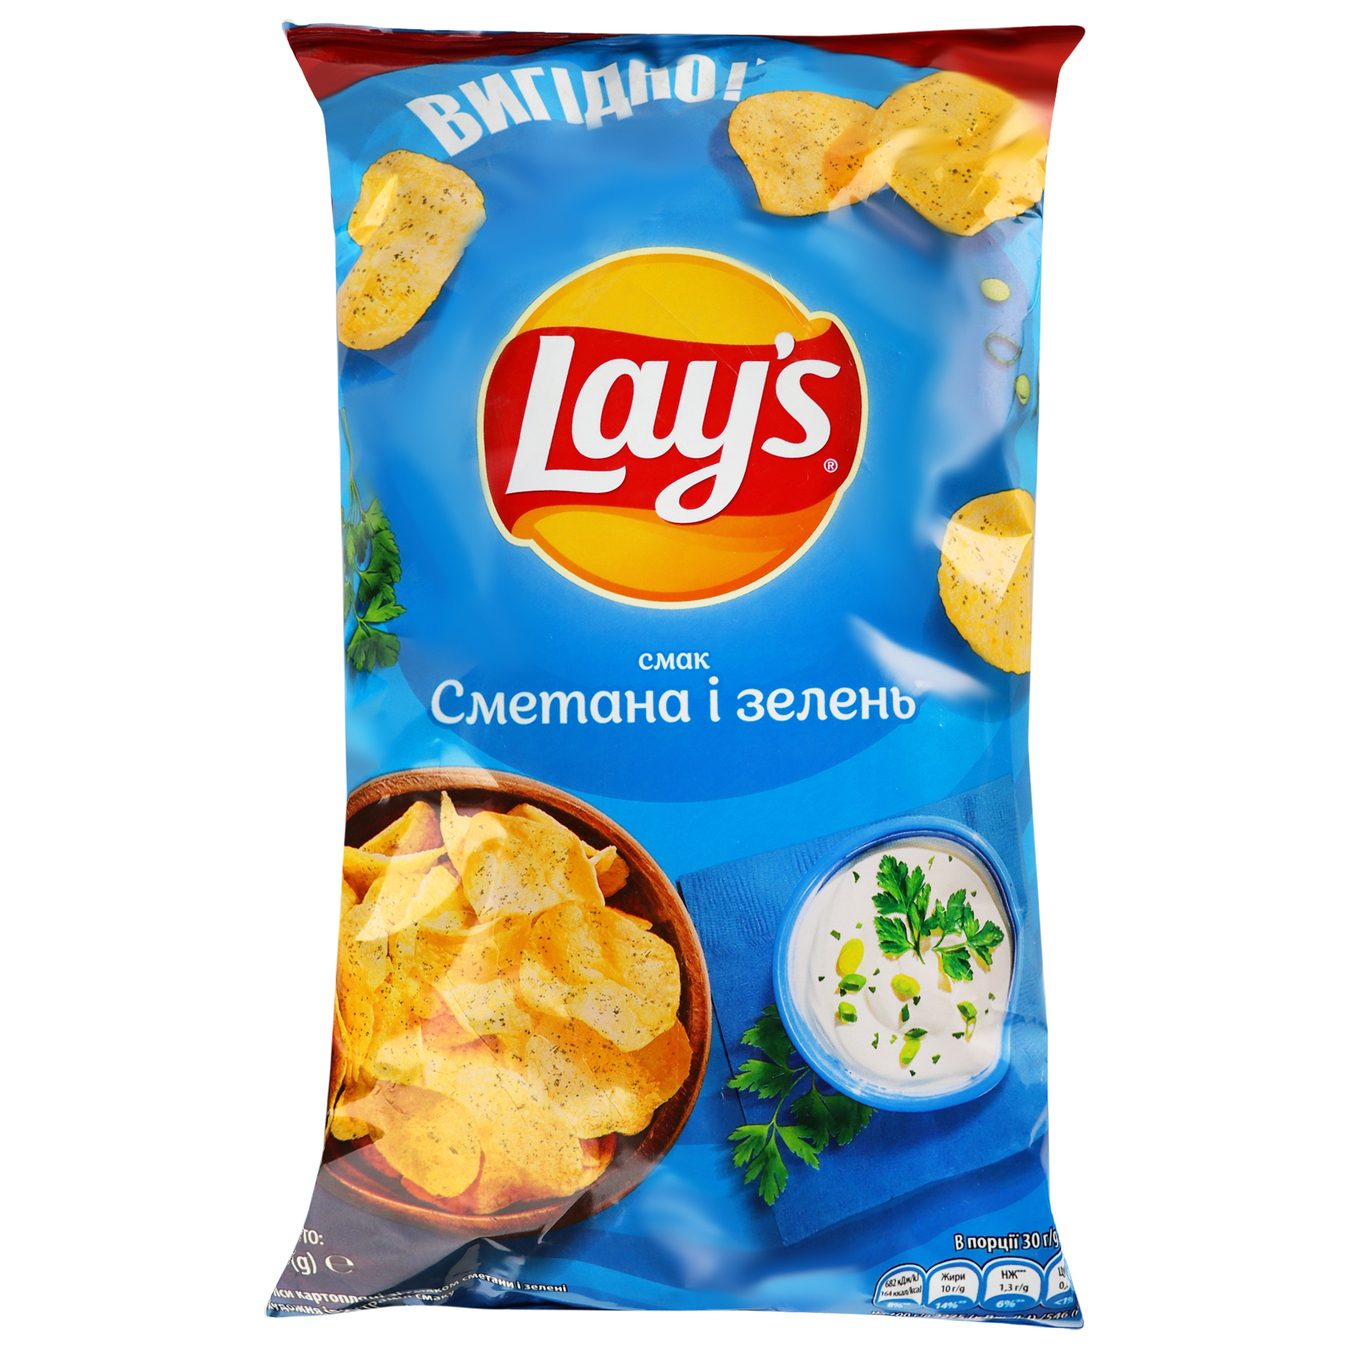 Potato chips Lay's sour cream and green flavor 170g